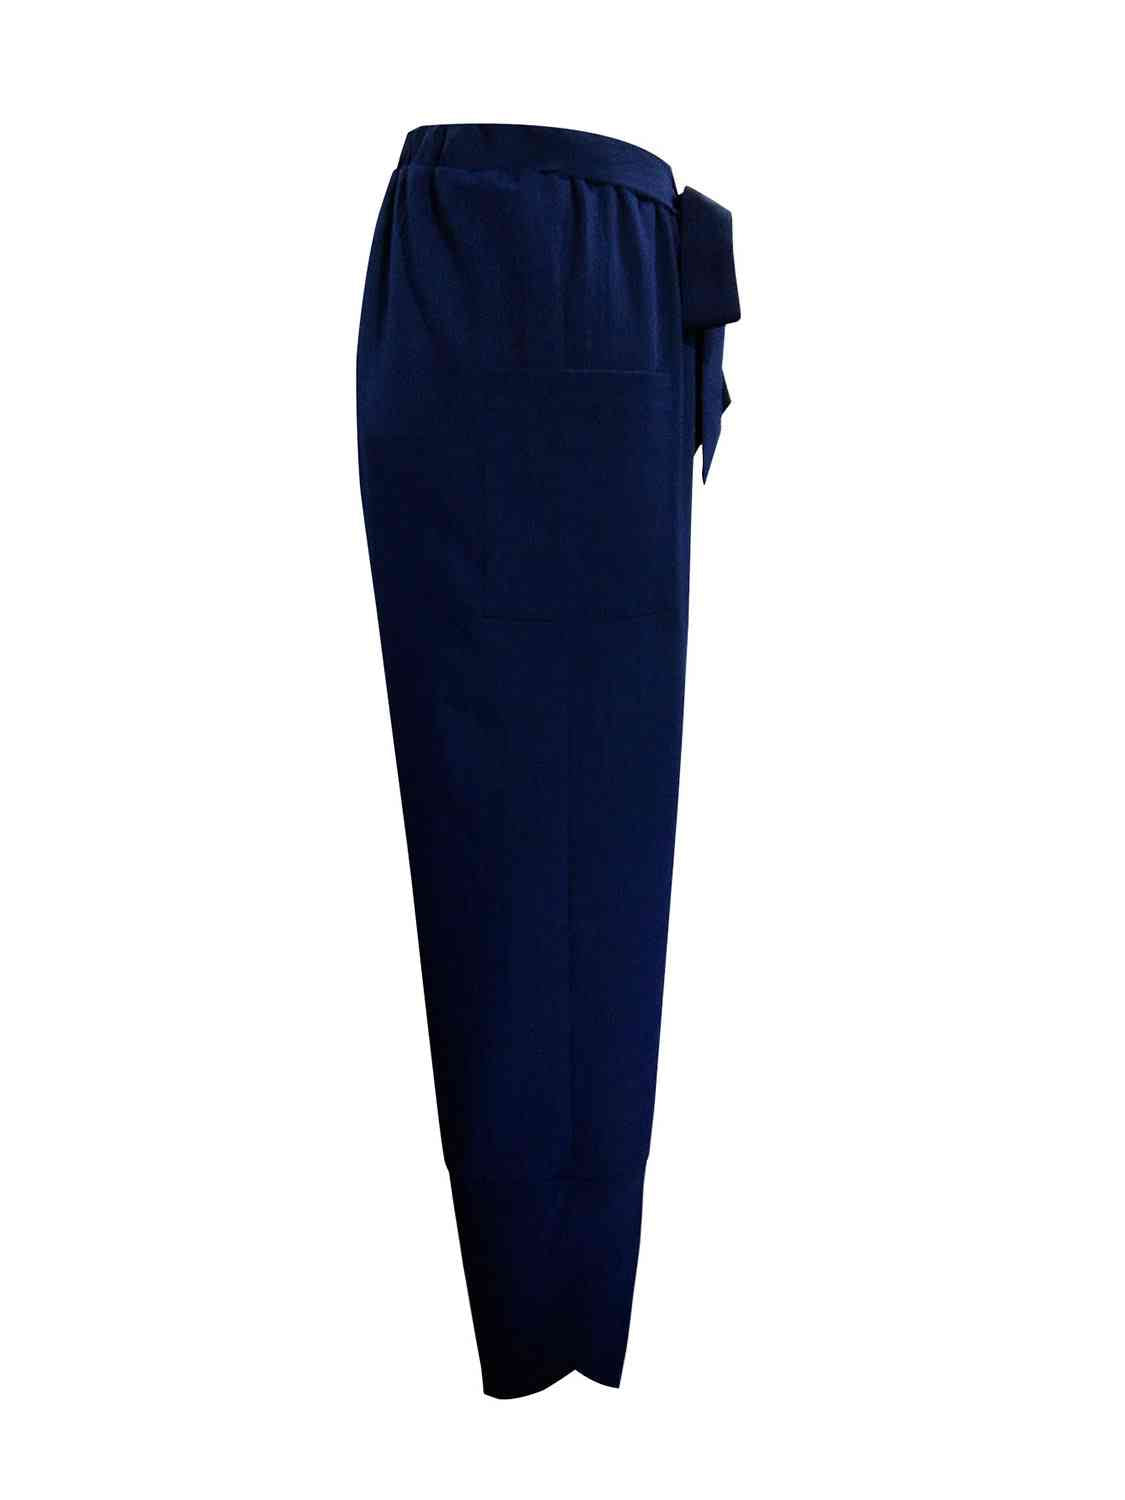 Blue Tie Front Pants with Pockets